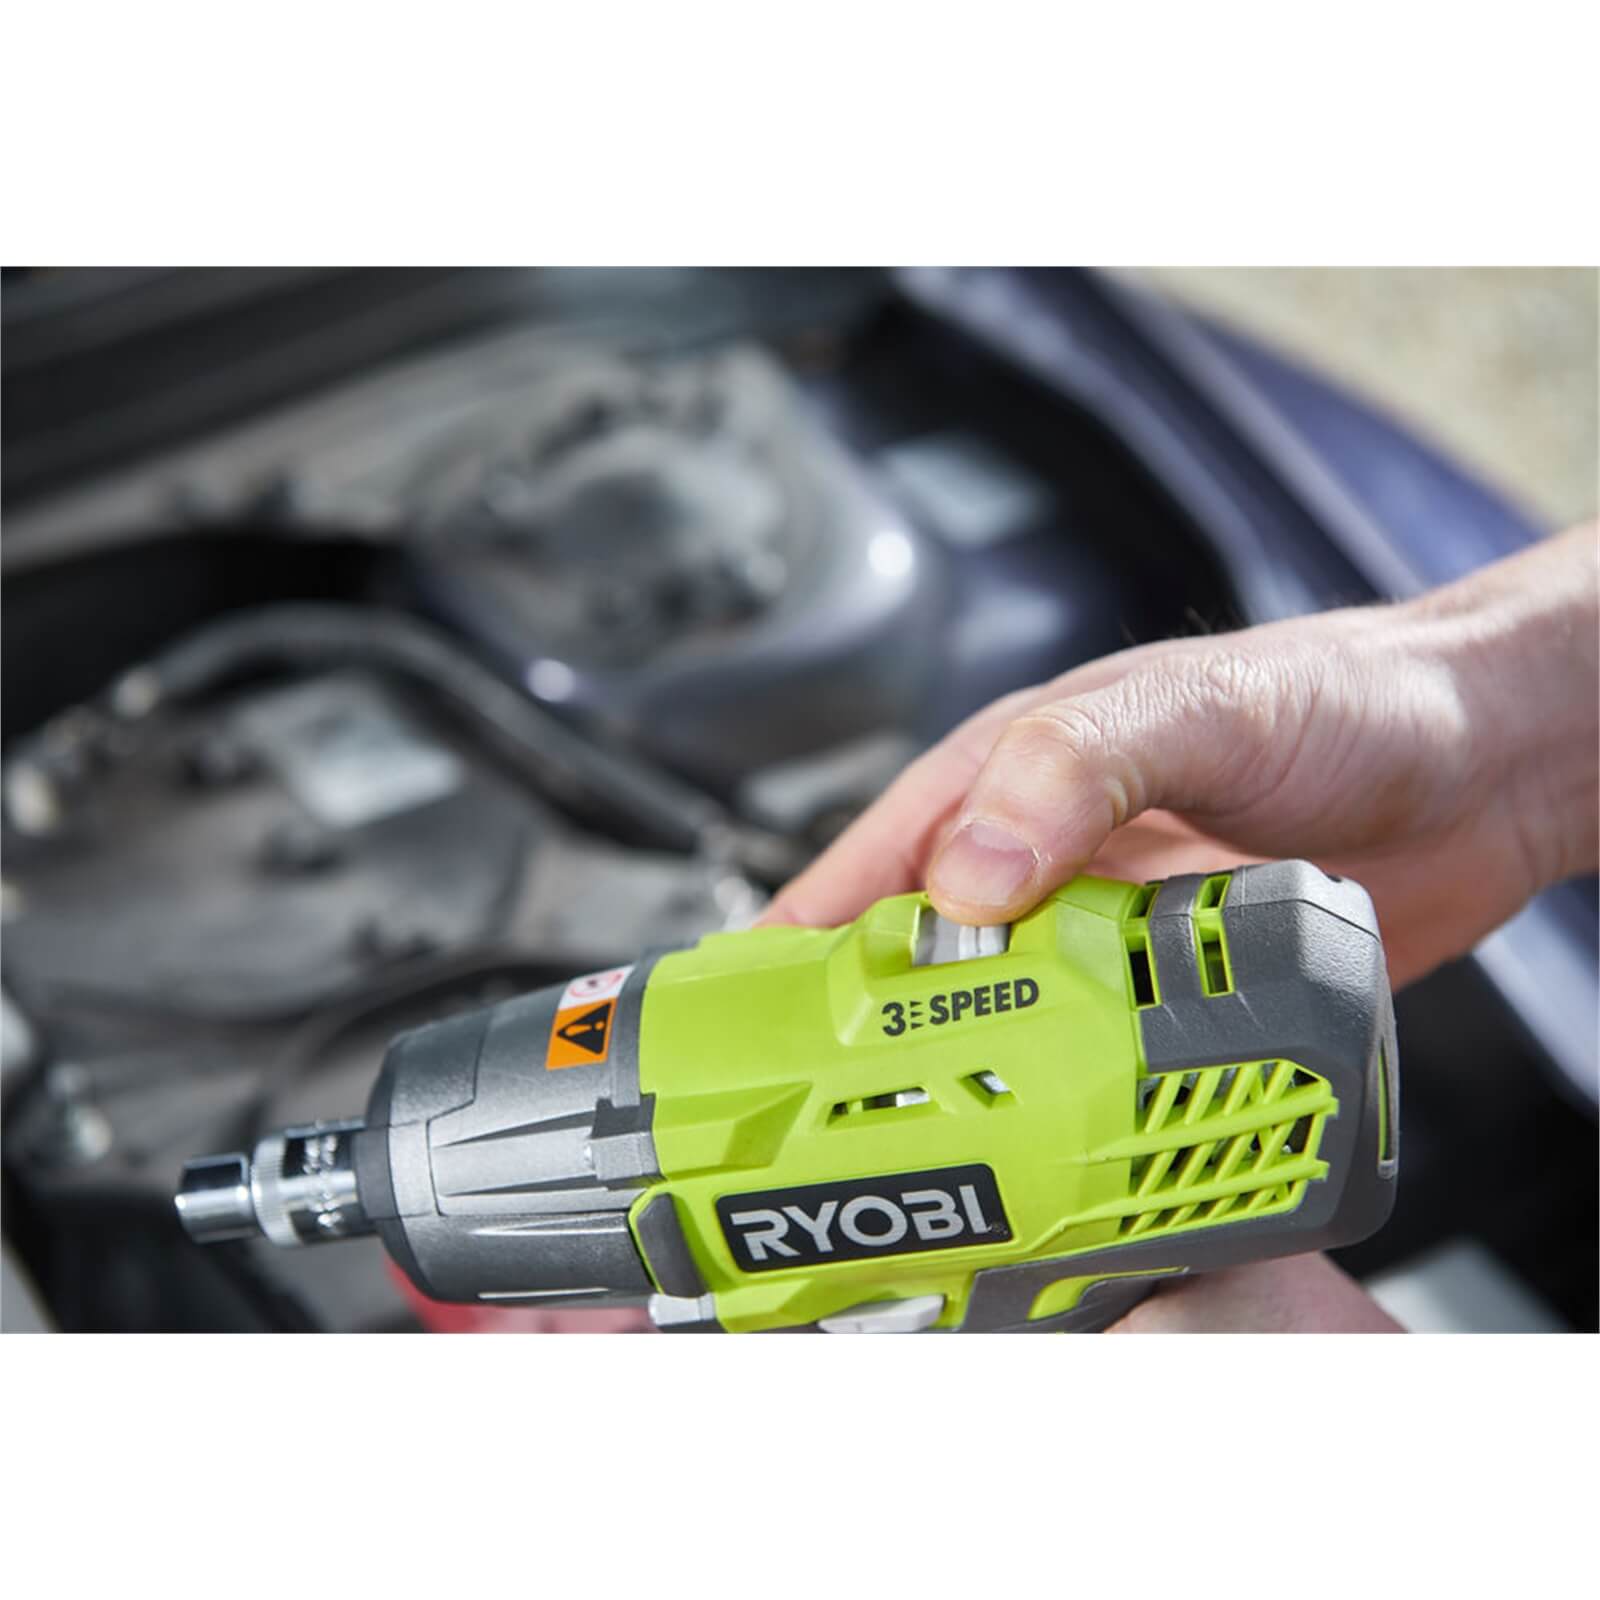 Ryobi ONE+ 18V 3 Speed Impact Wrench R18IW3-0 (Tool only)